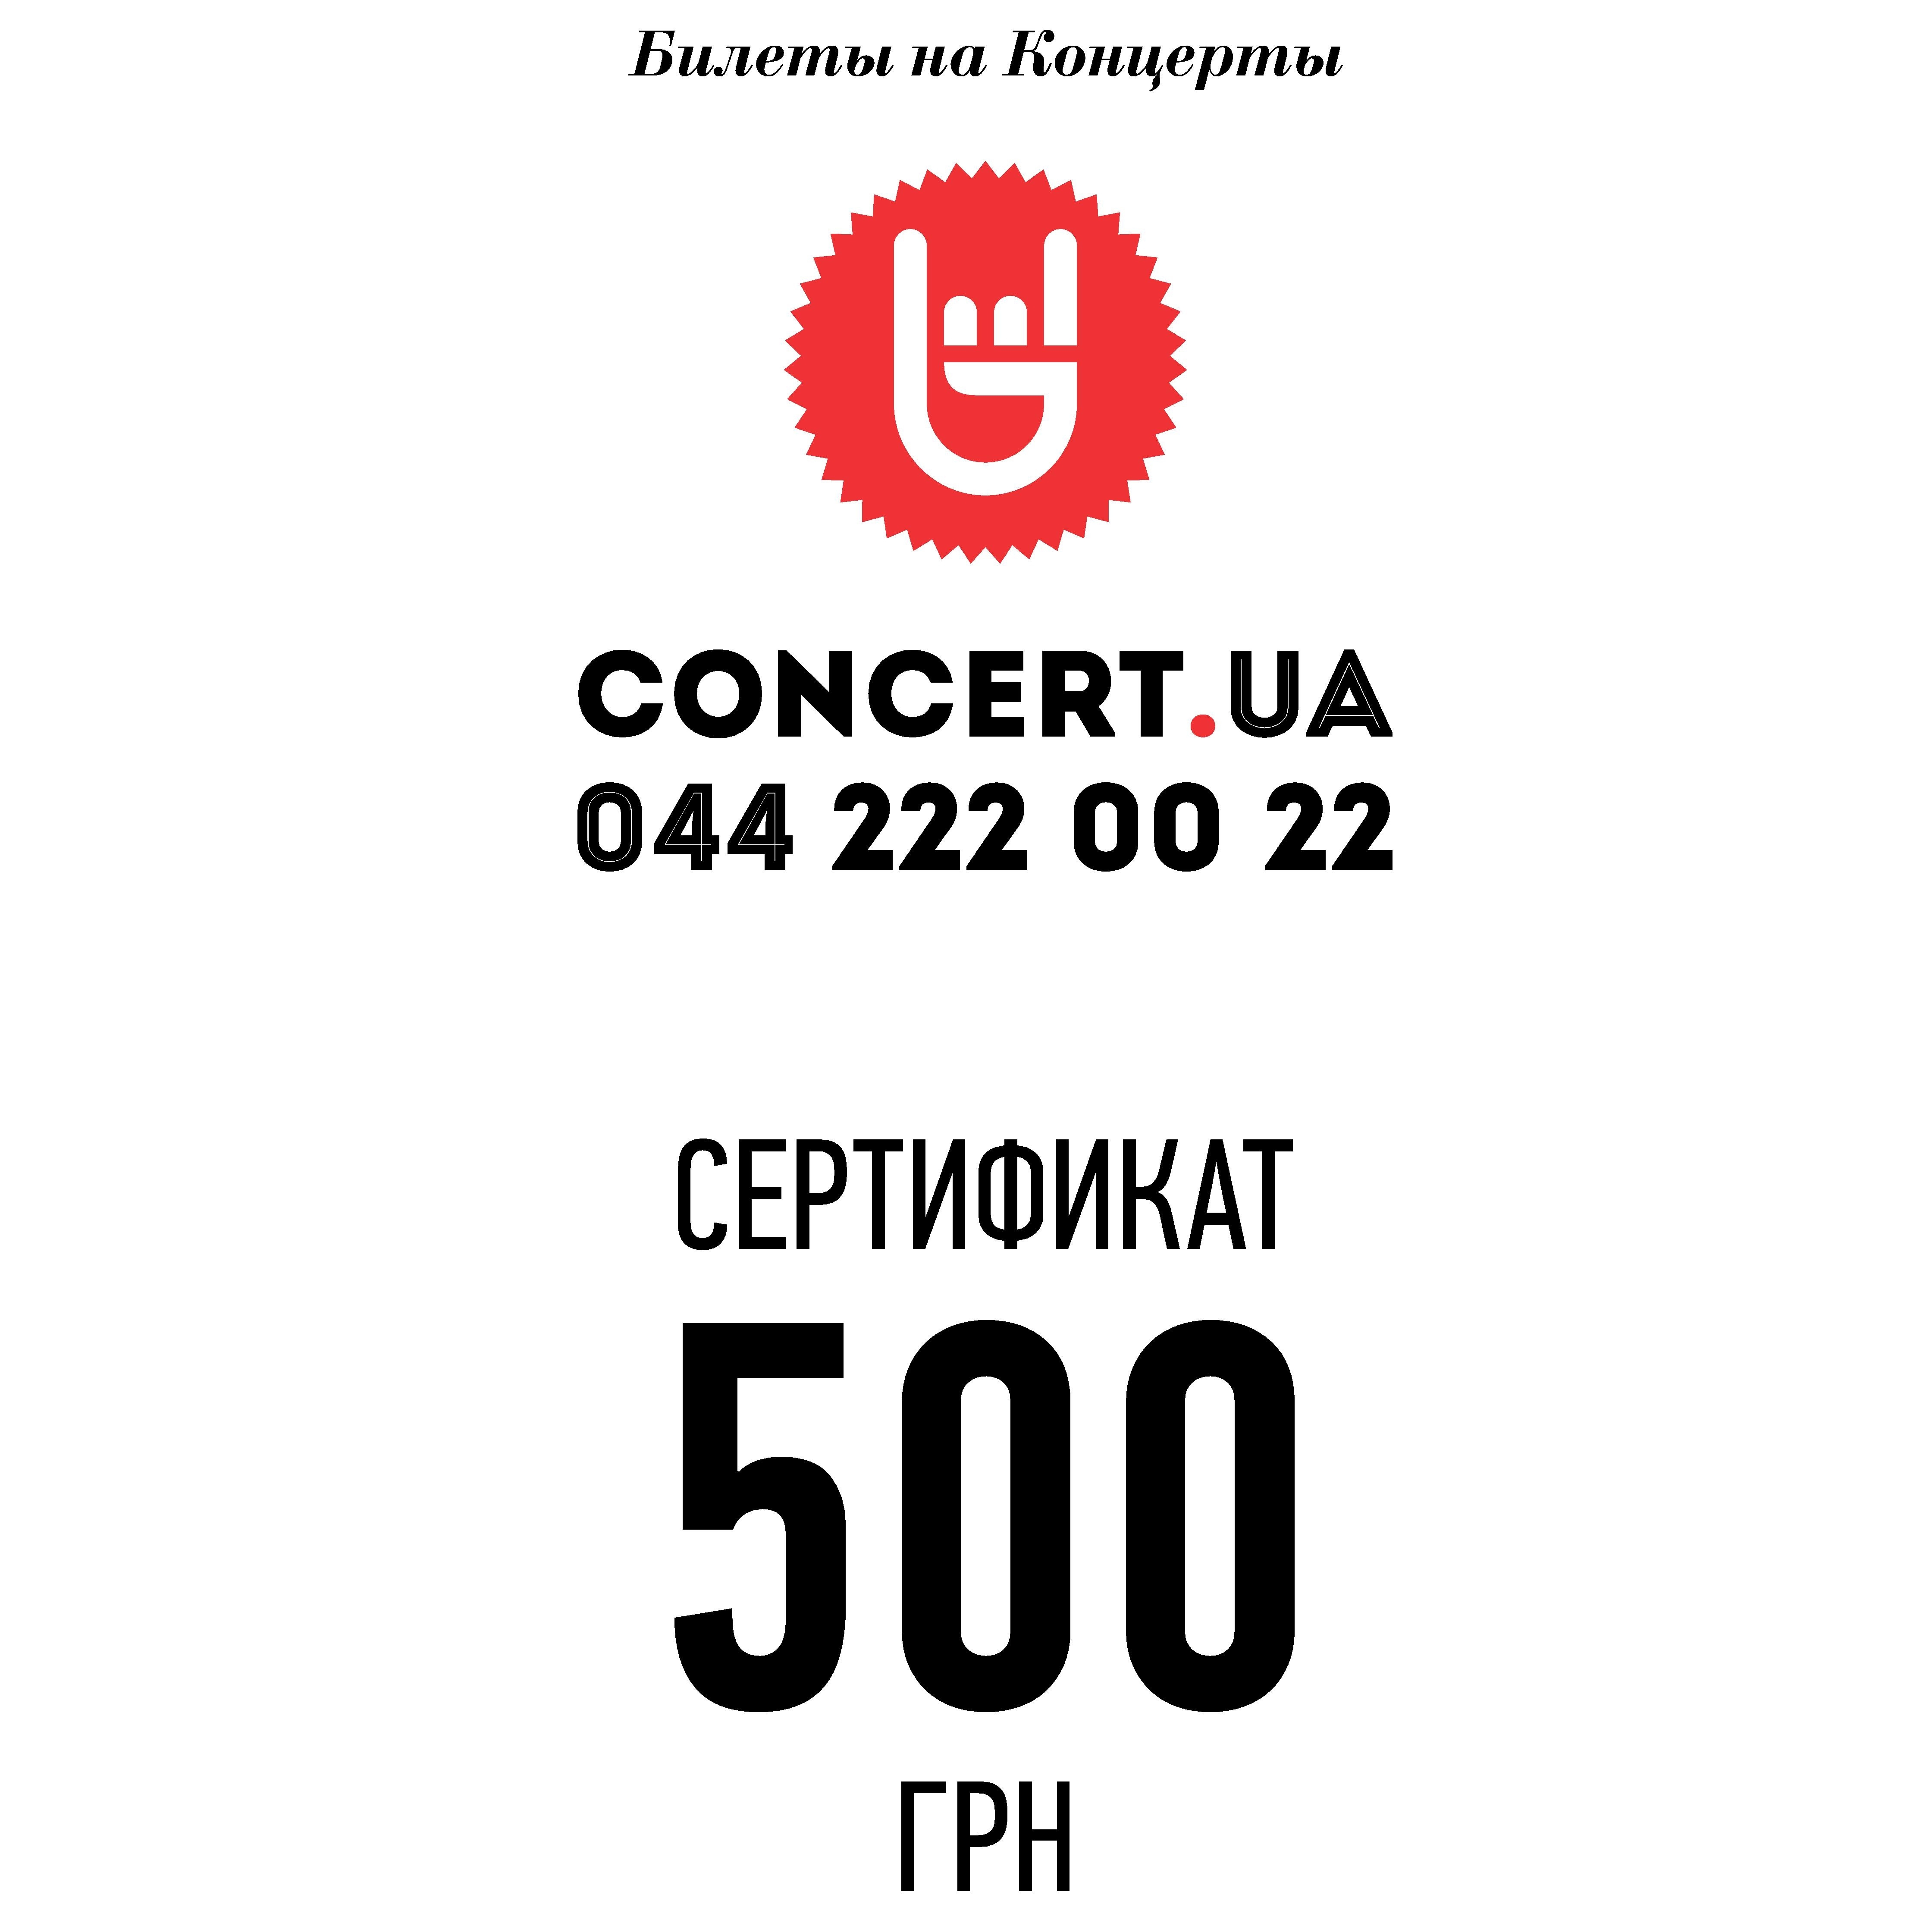 Product Gift certificate concert.ua 500 UAH